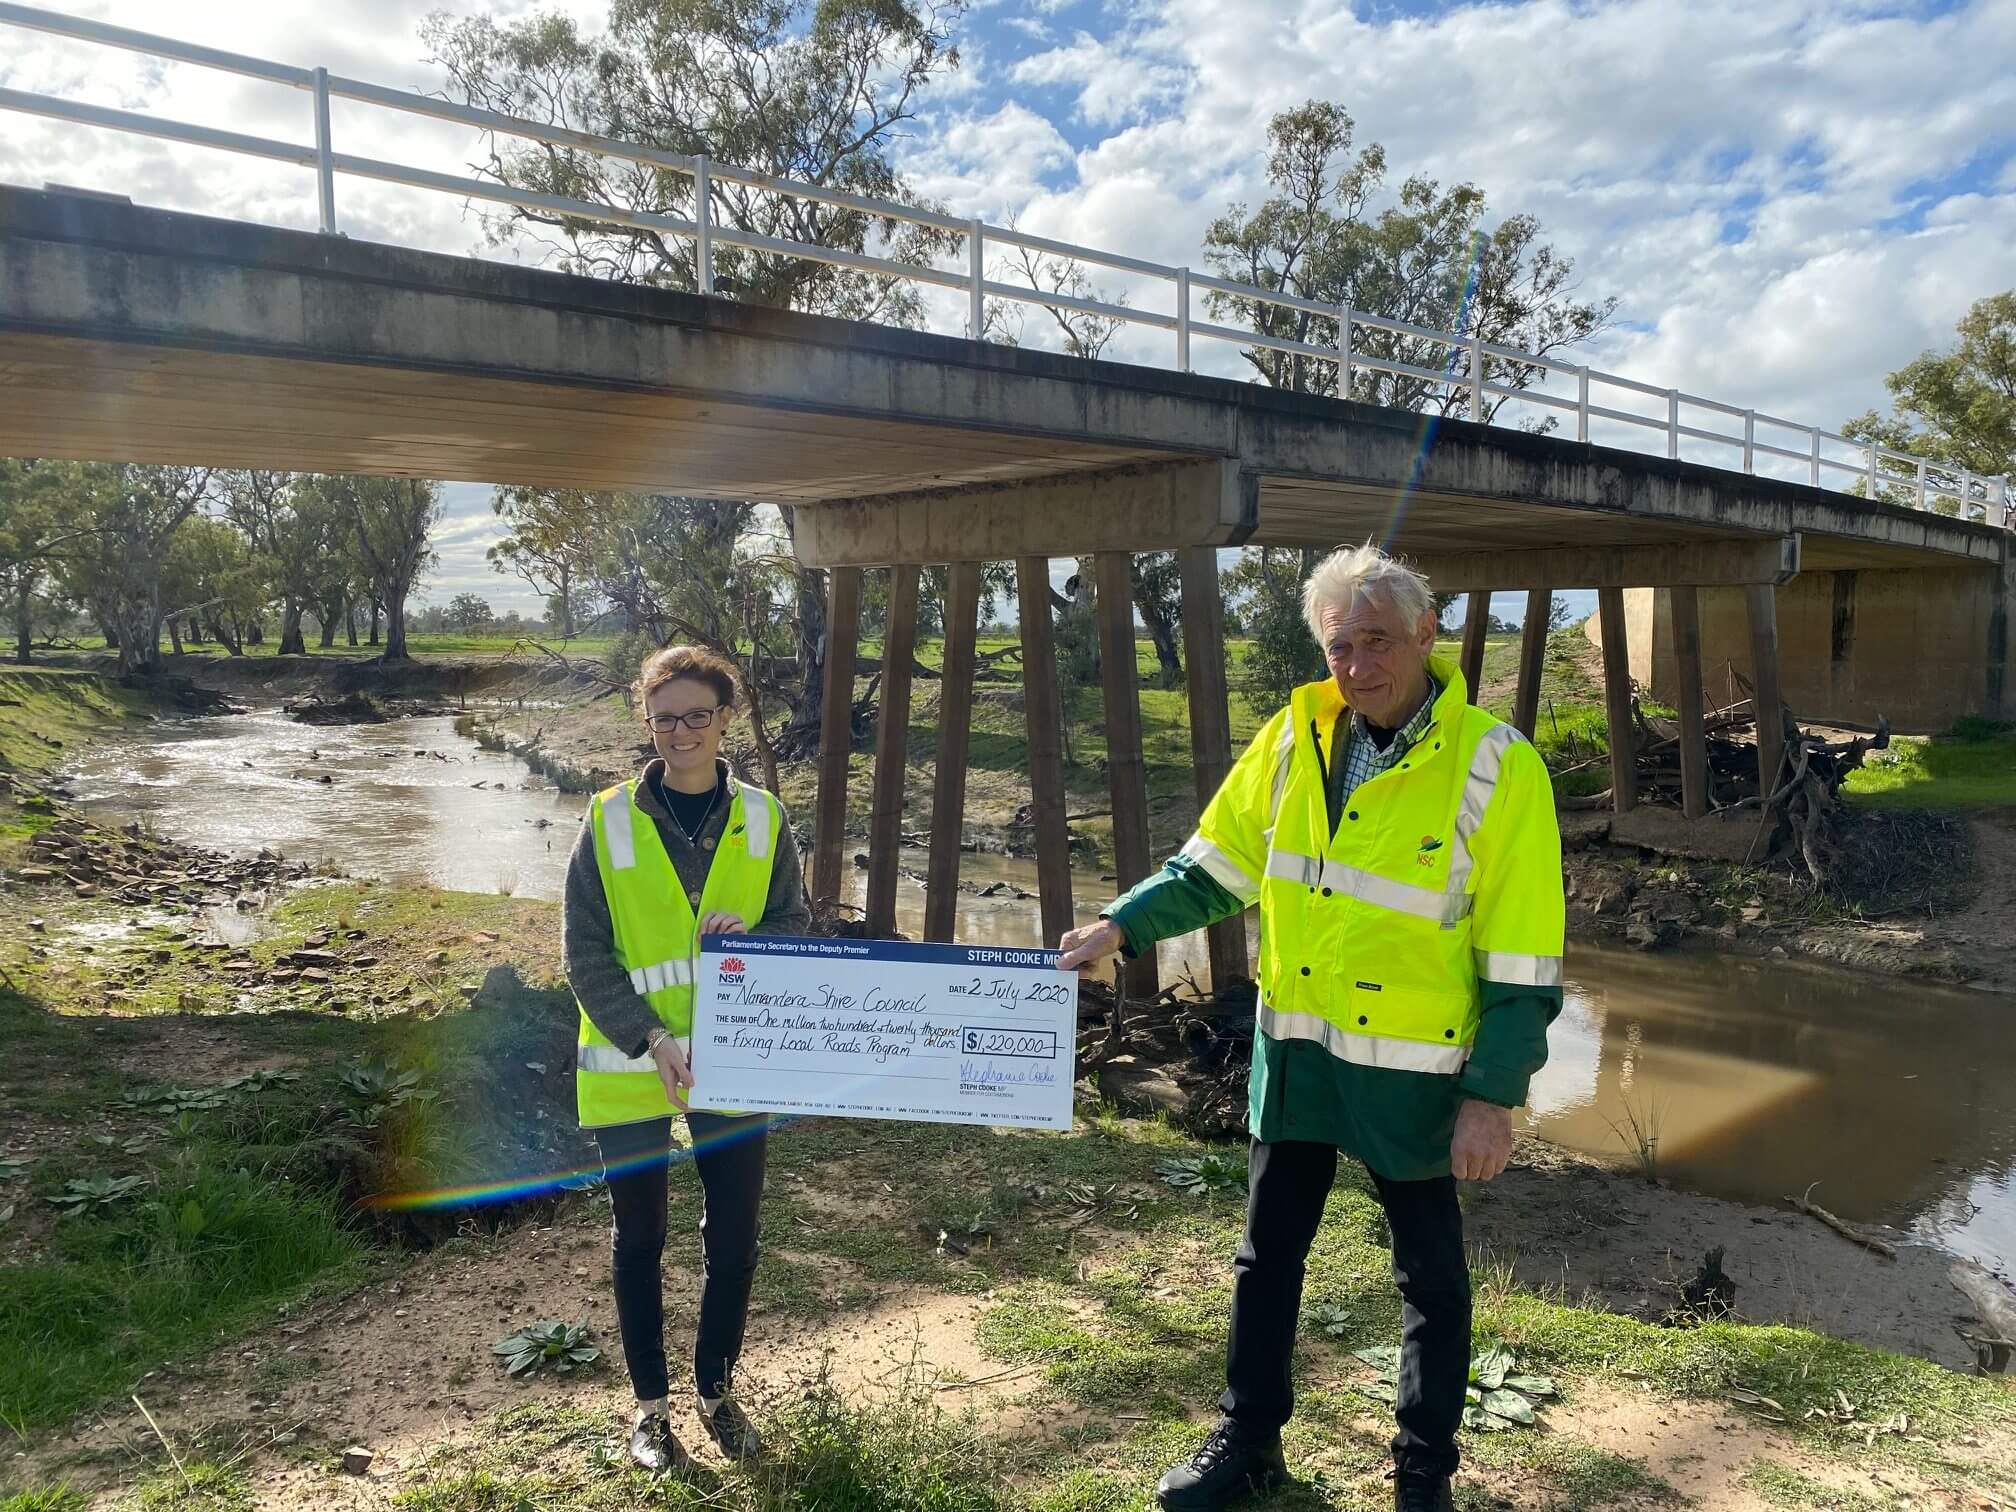 teph Cooke and Narrandera Mayor Neville Kschenka at the Brewarrina Bridge. They hold a large cheque between them and wear hi-vis vests. The underside of the bridge can be seen.